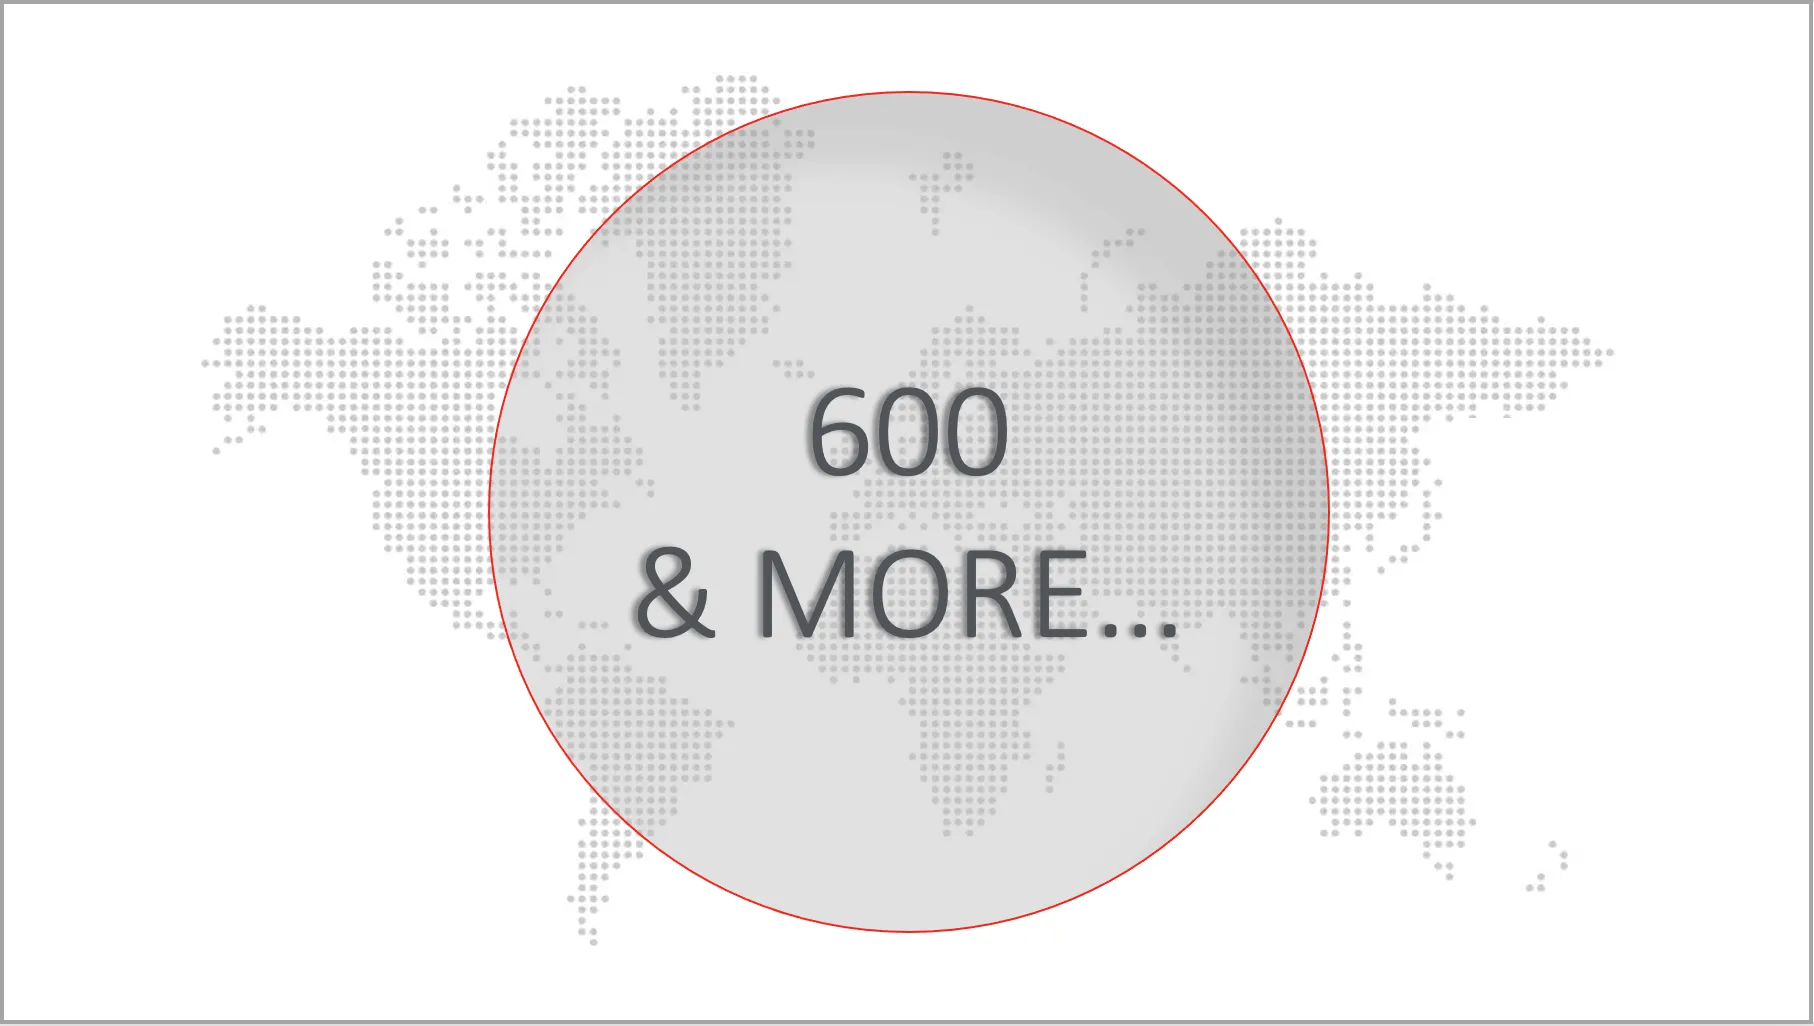 600 good reasons to join us